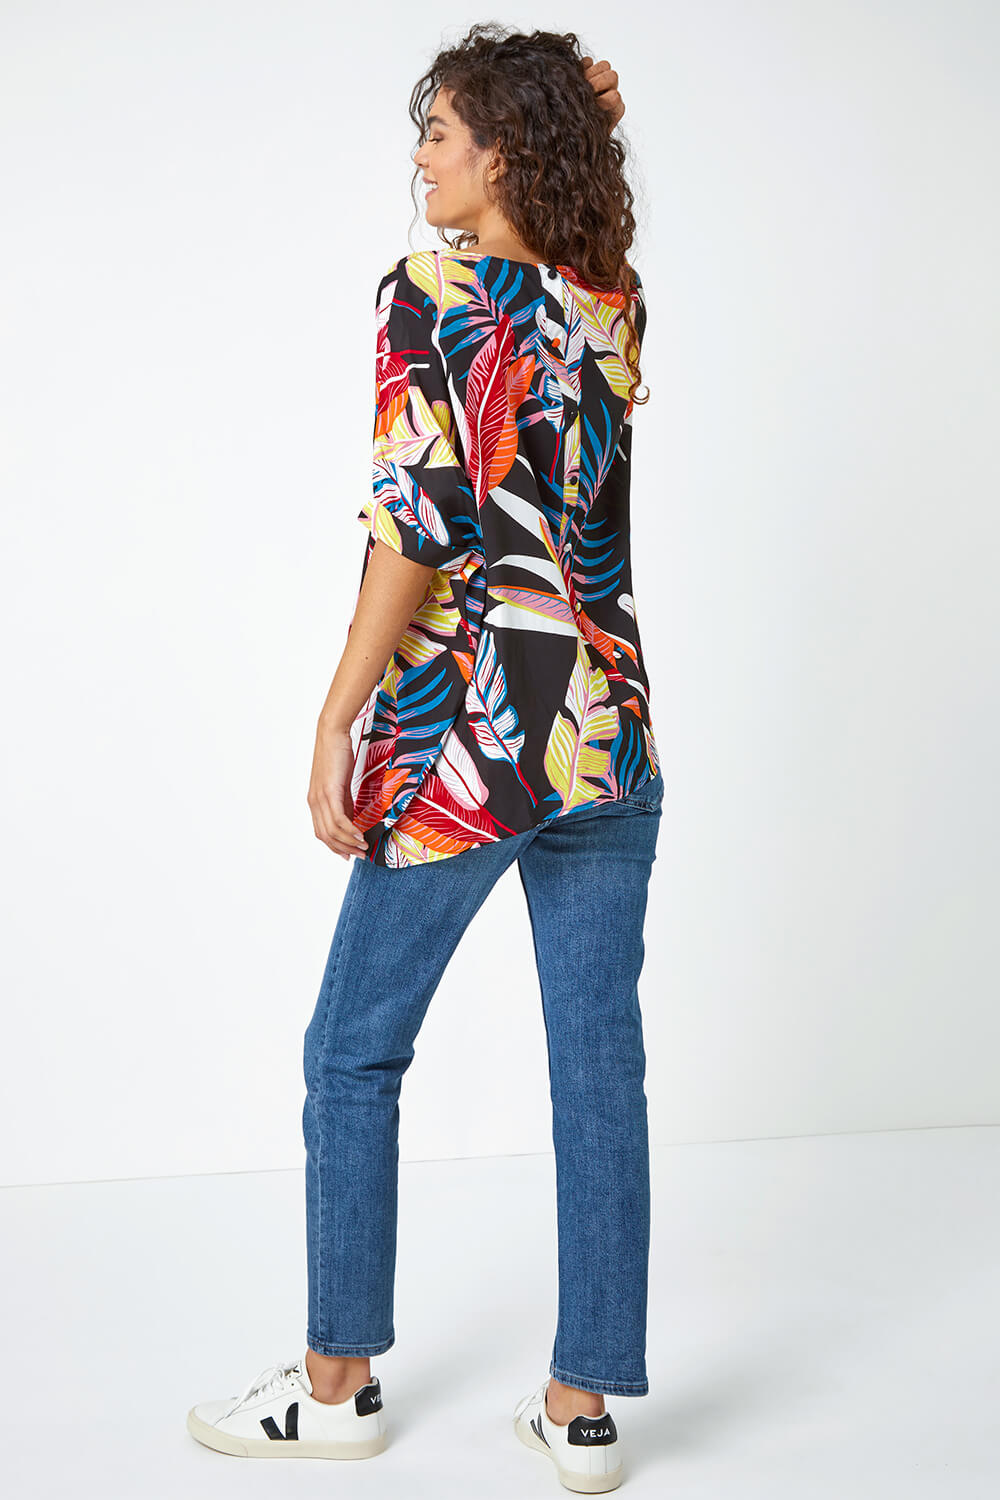 Black Tropical Print Button Back Top, Image 3 of 5